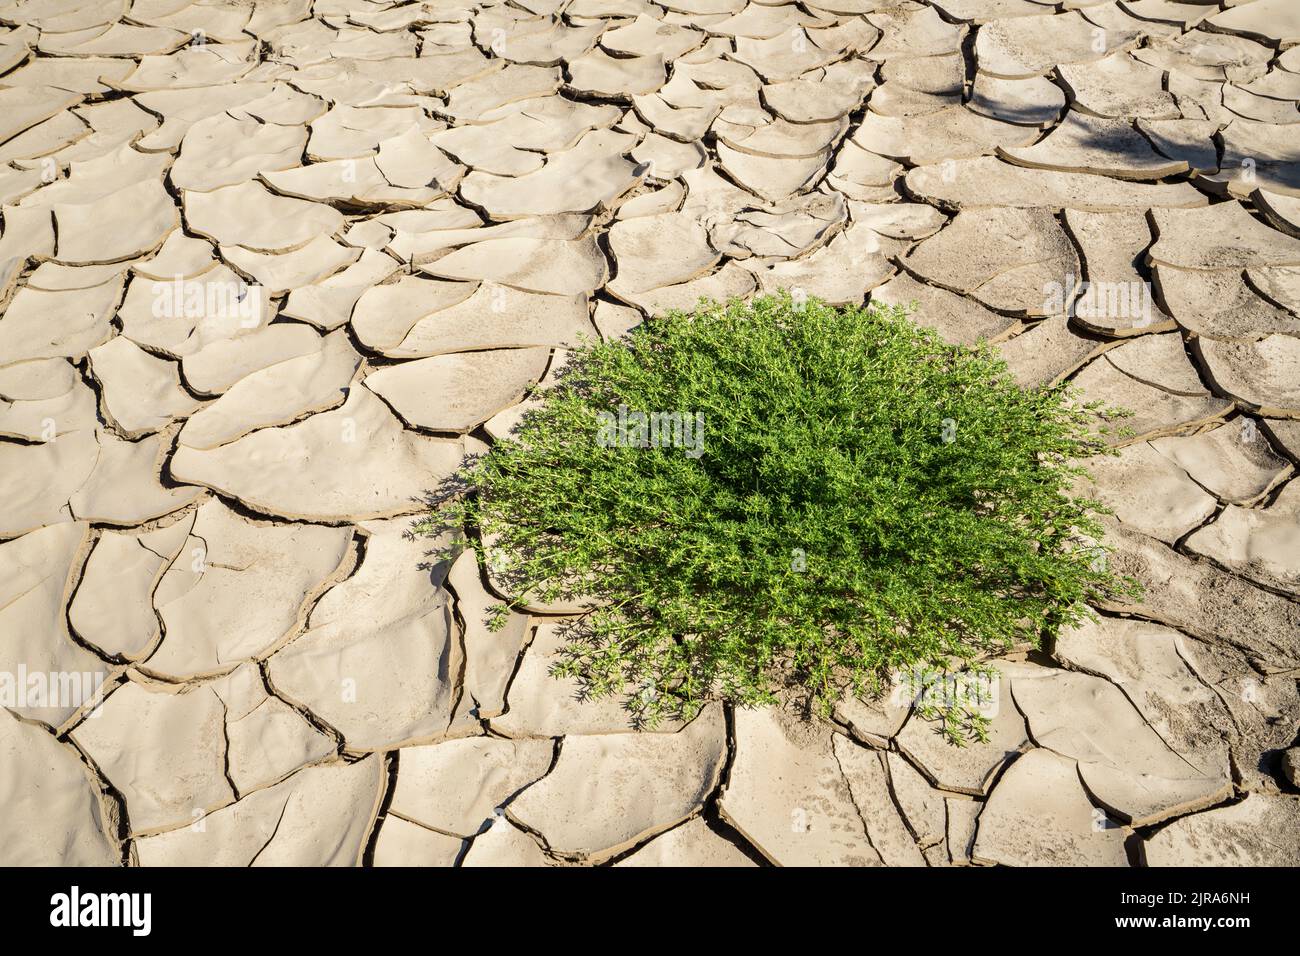 Symbolic Image, Hope, Environment, Climate Change, Green plants grow within dry river bed patterns. Swakop River, Namibia, Africa Stock Photo